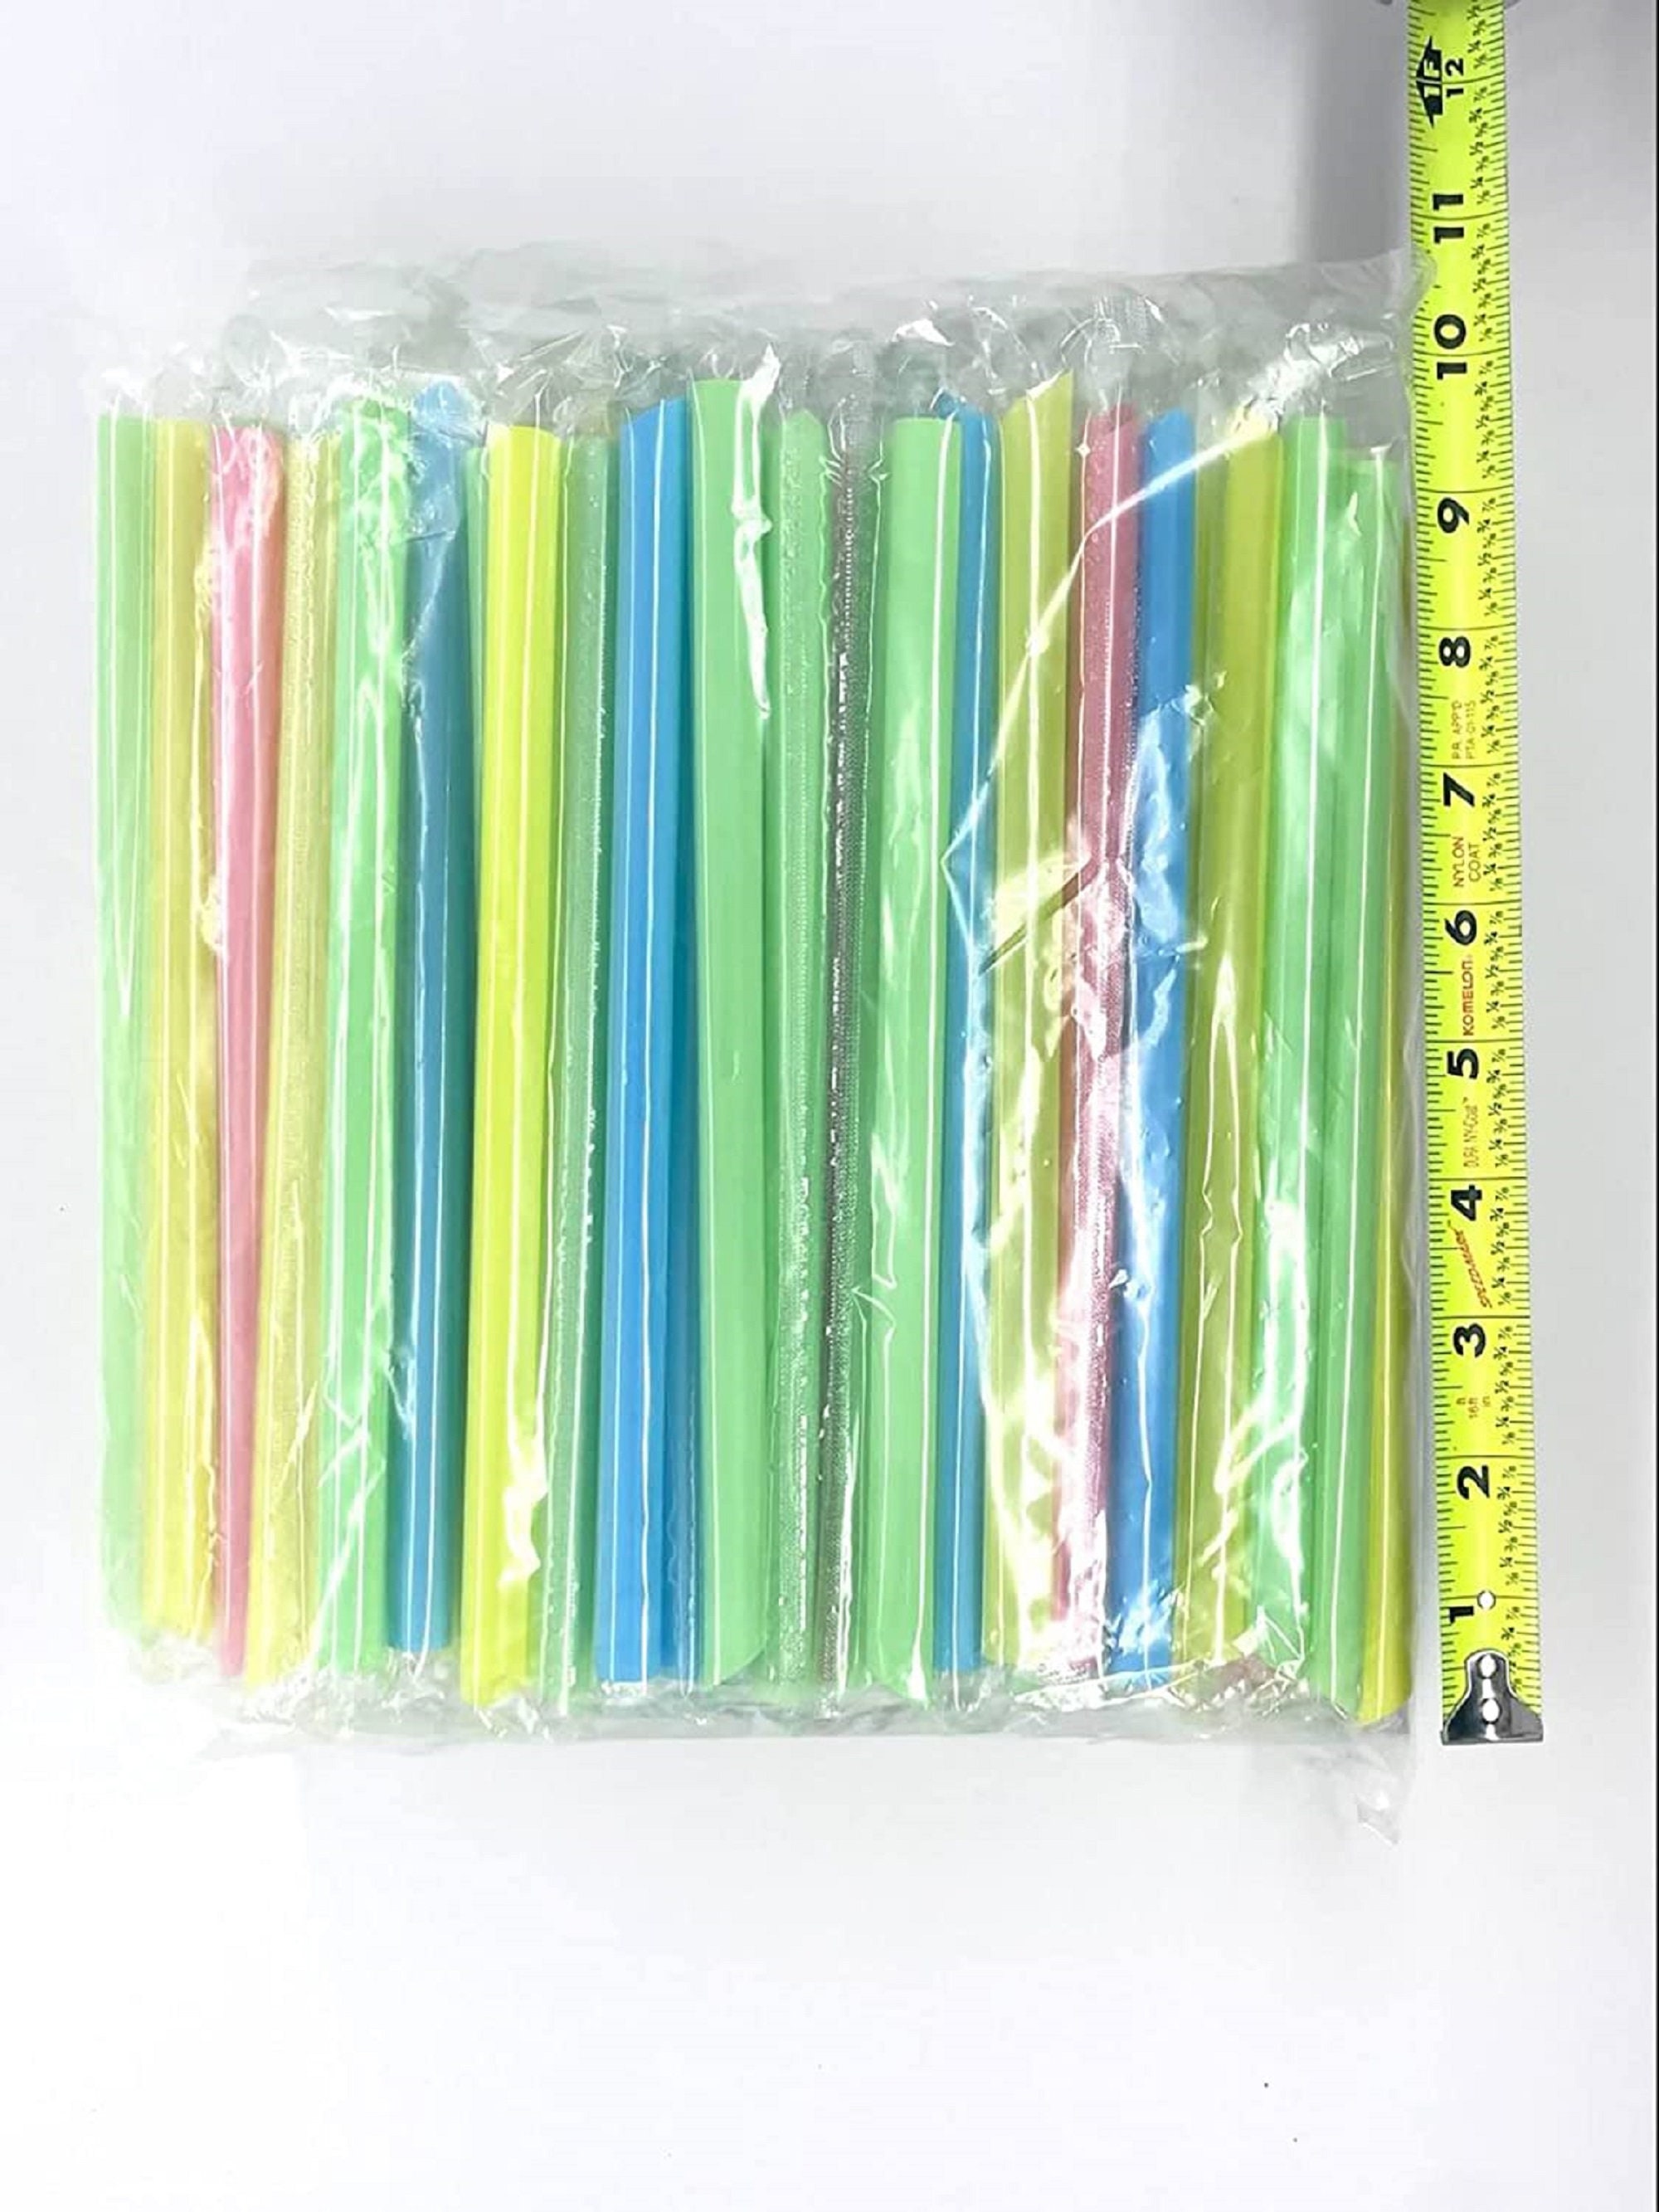 50 BOBA FAT STRAWS Extra Wide 9 X 1/2 Fat Drinking Straws Solid Colors by  Buddha Bubbles Boba -  Sweden